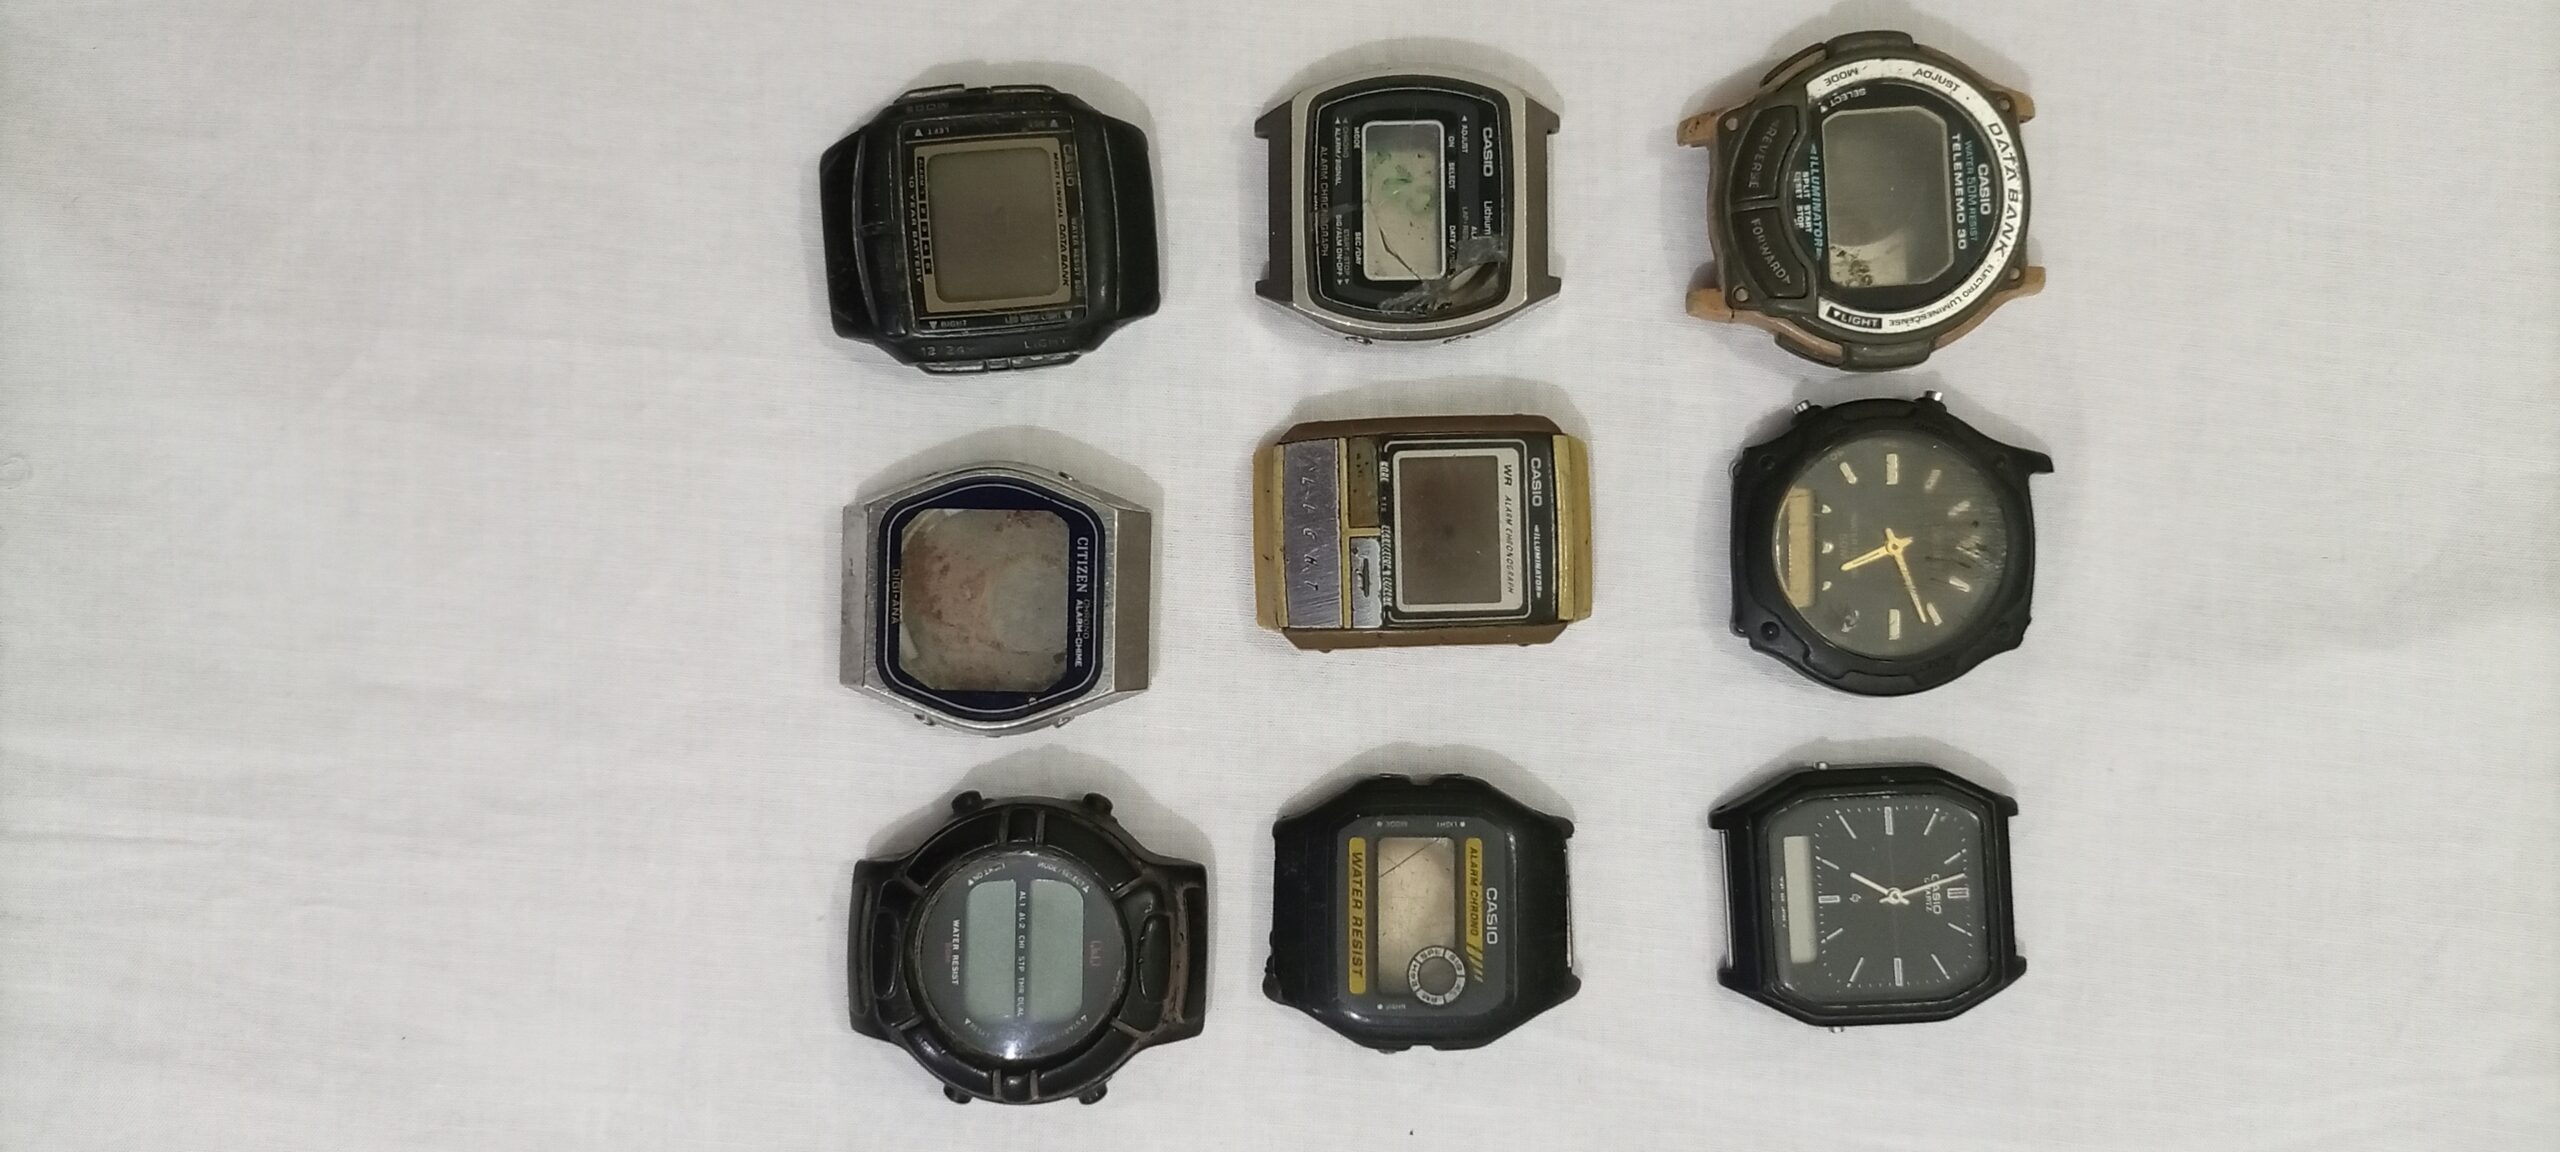 Lot of 18 Vintage Antique Preowned Digital Watches Casio Seiko Citizen Japan - PK00009-IMG_20221020_185130_057-scaled - VintageWatches.PK